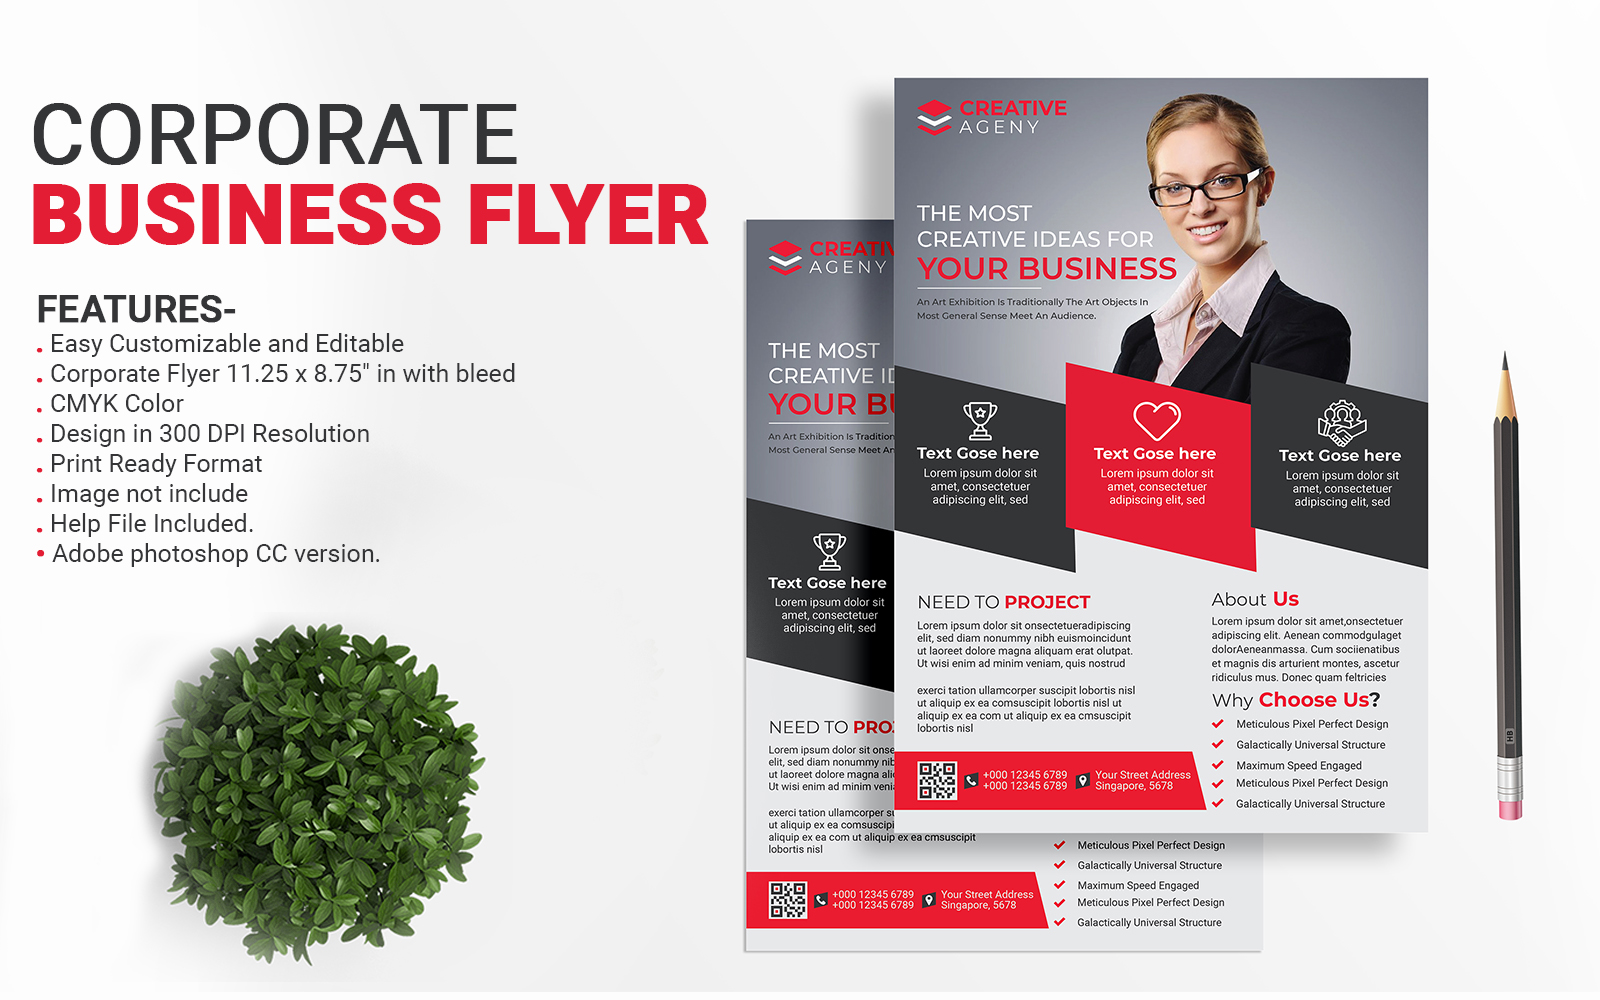 Corporate Business Flyer Template #123